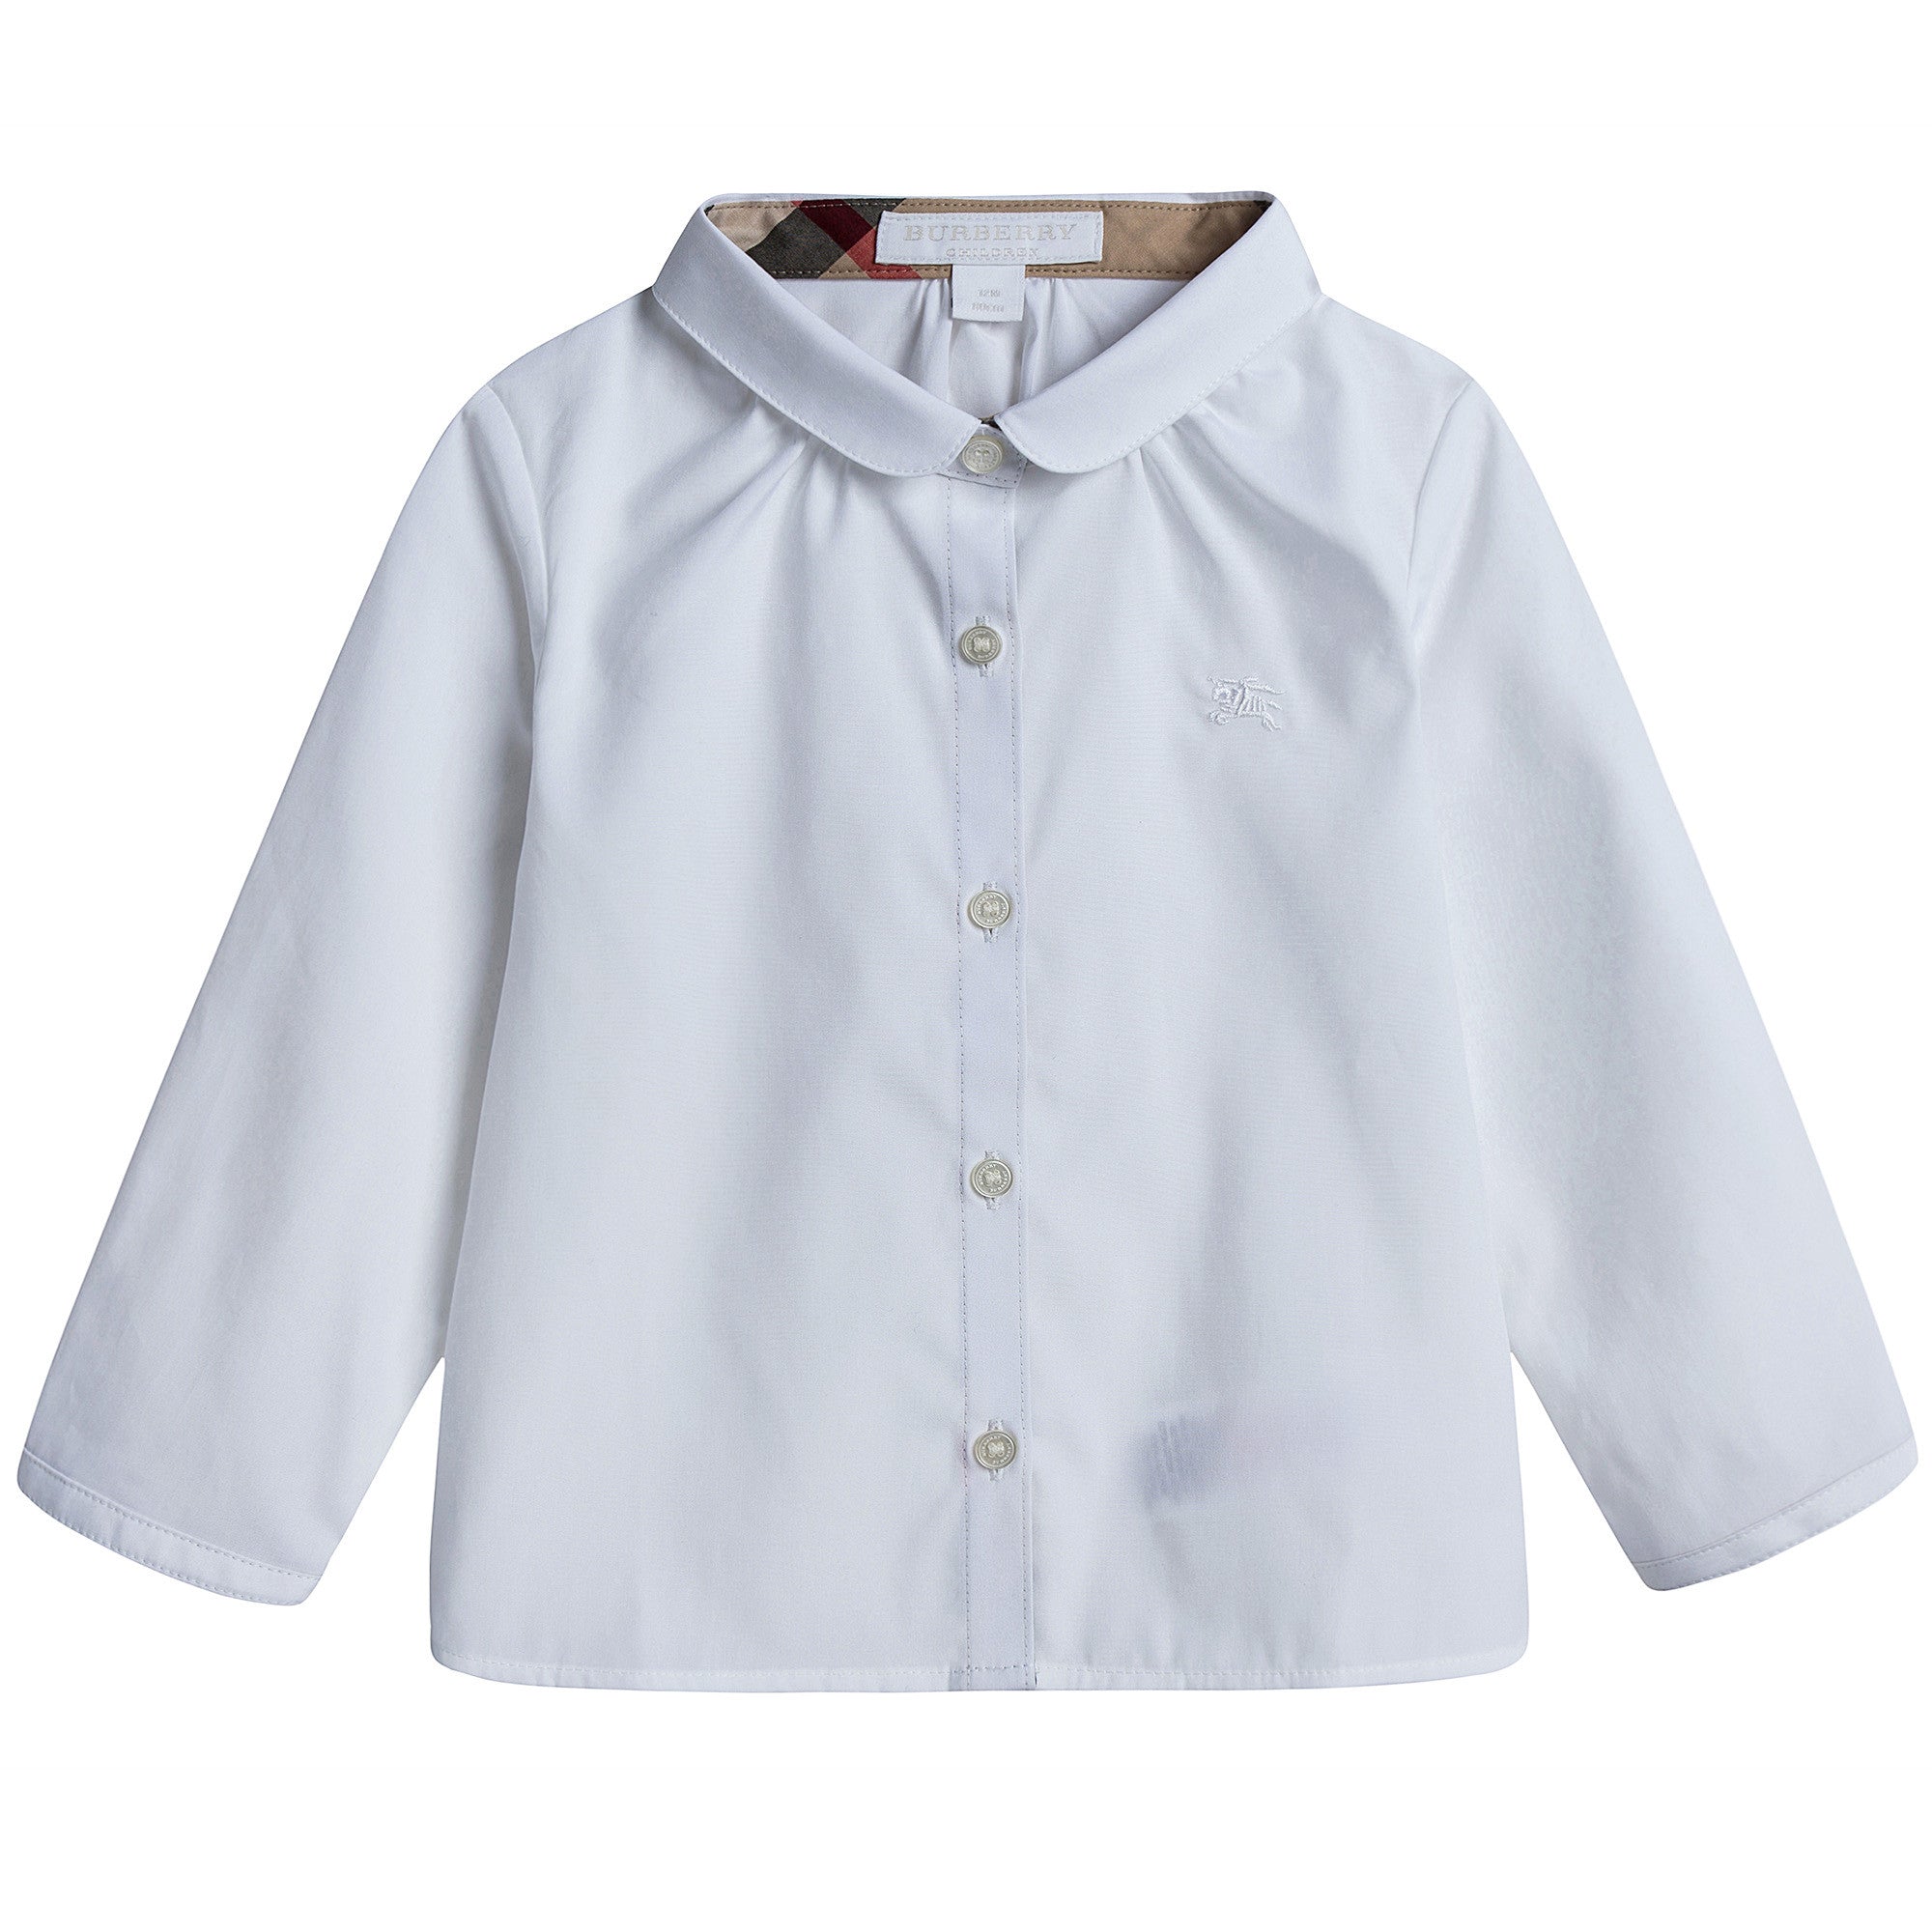 Baby Girls White Blouse with Check Cuffs - CÉMAROSE | Children's Fashion Store - 1